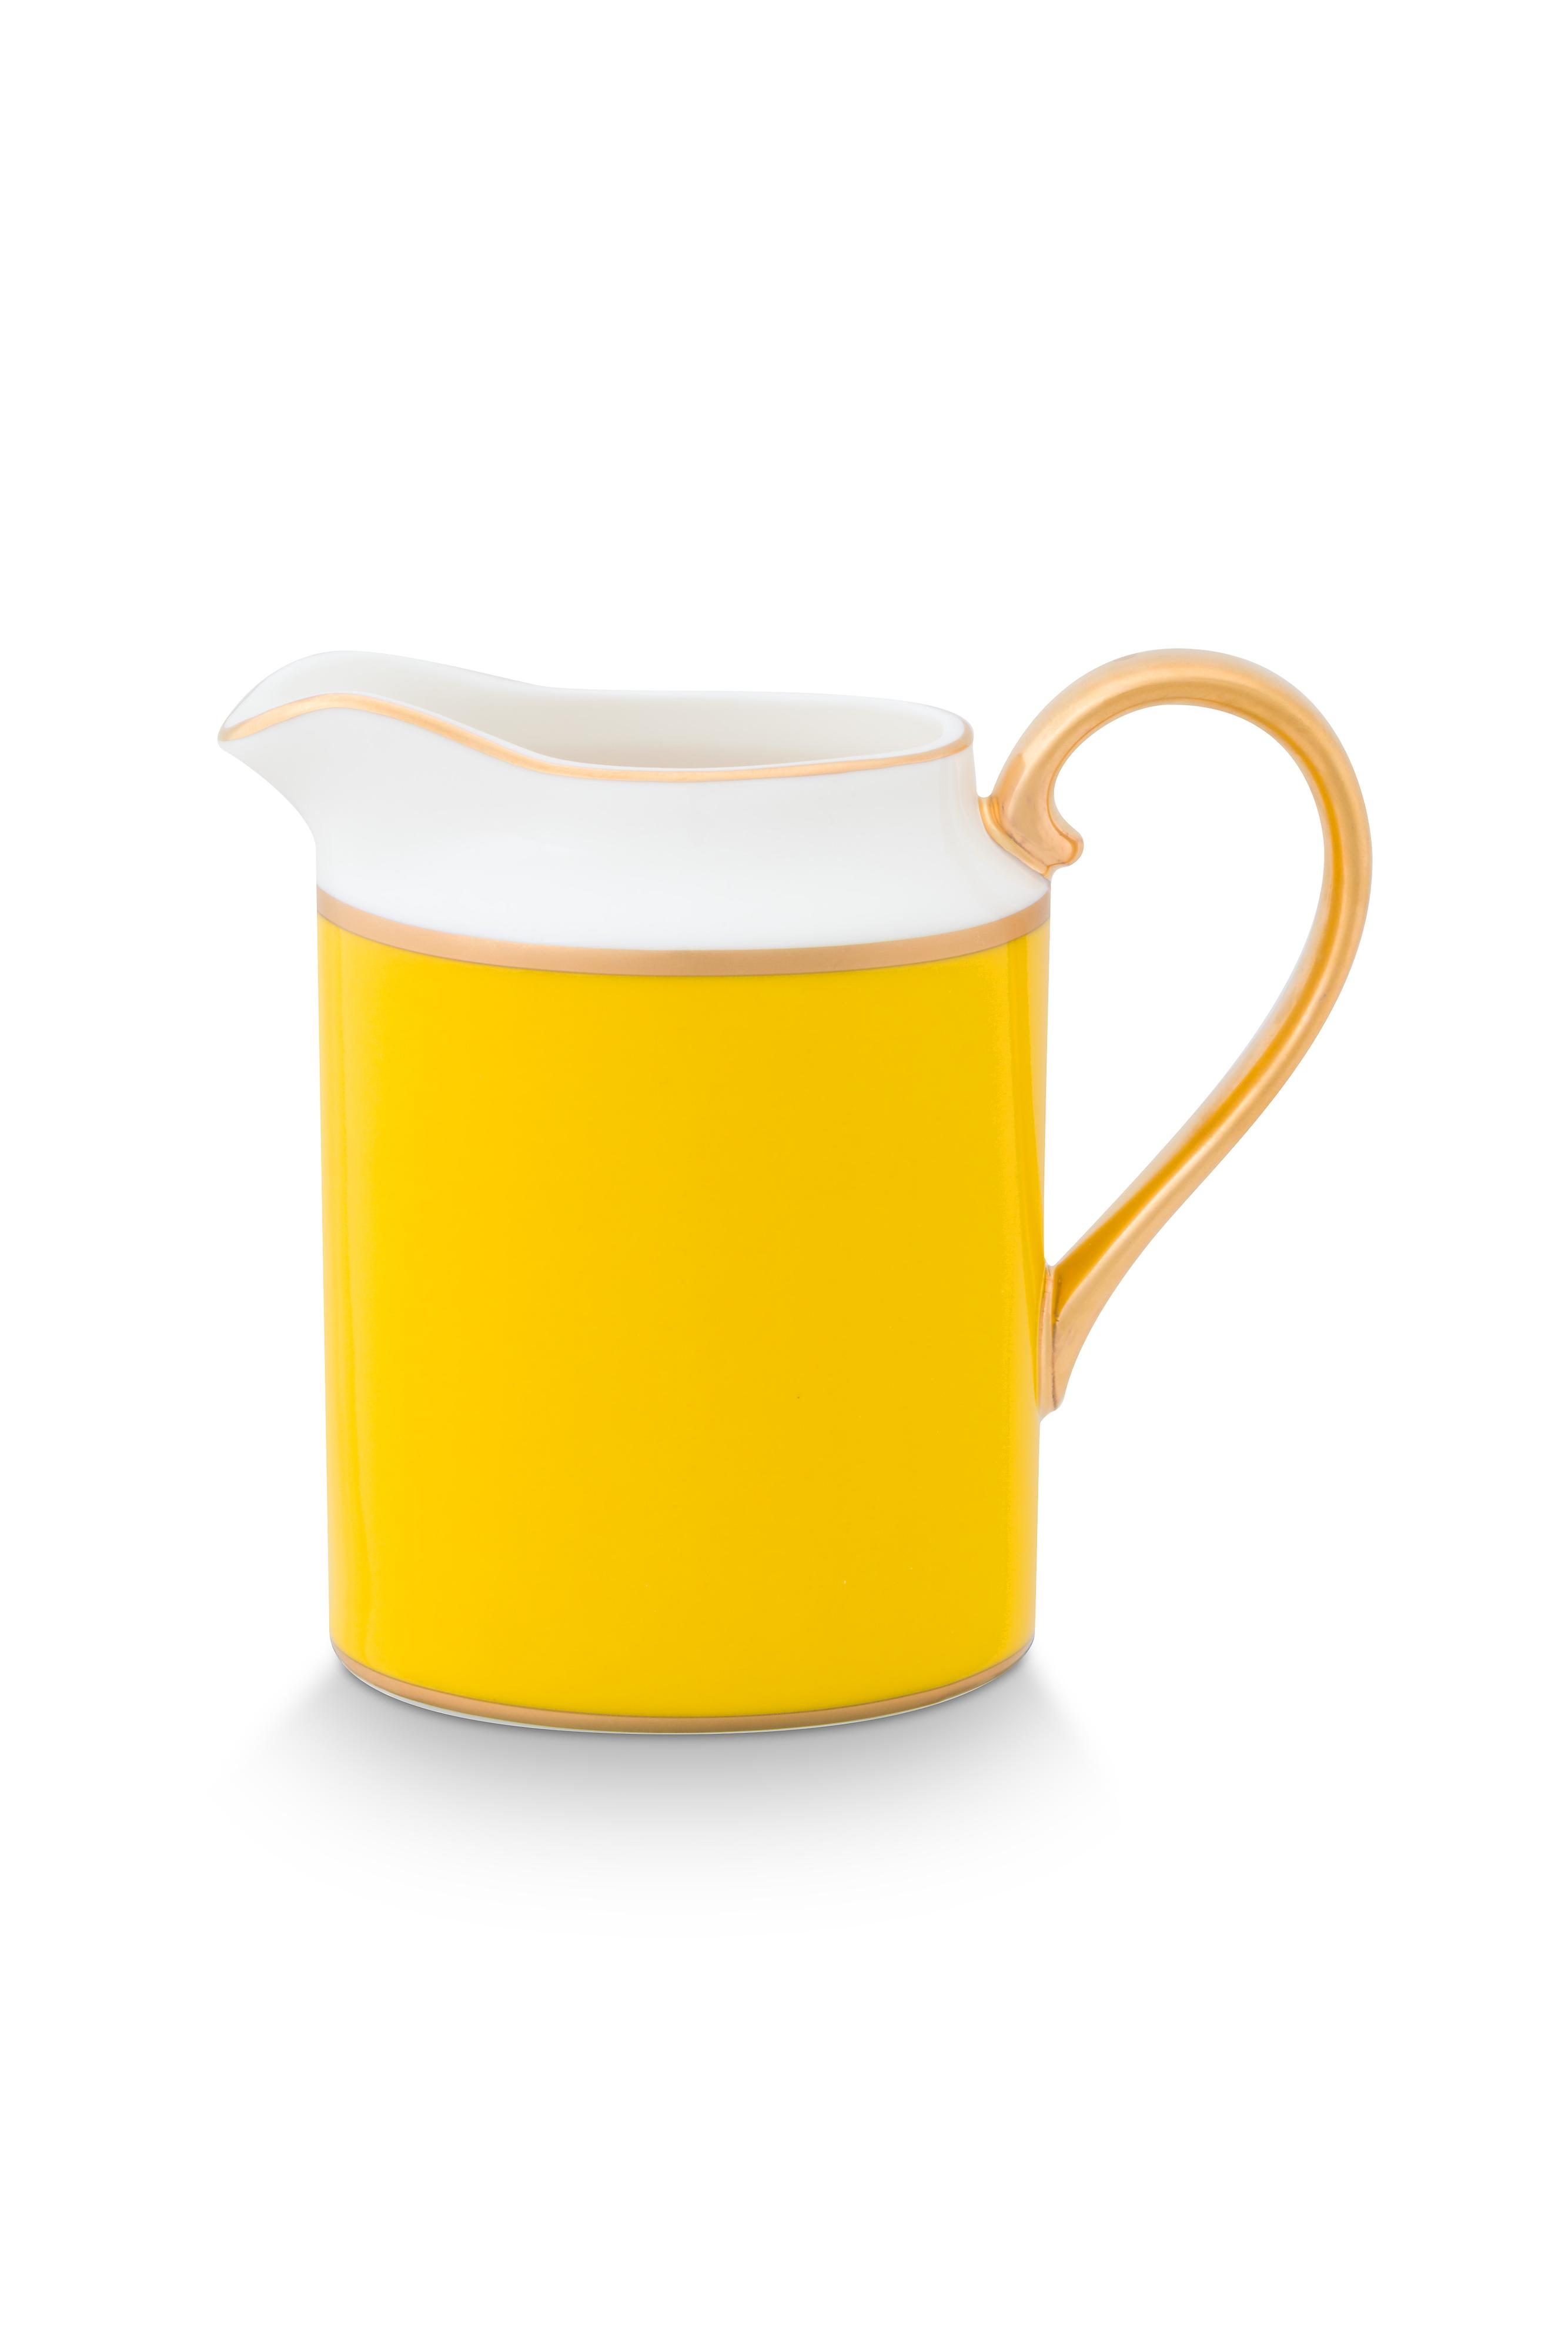 Jug Small Pip Chique Gold-yellow 260ml Gift